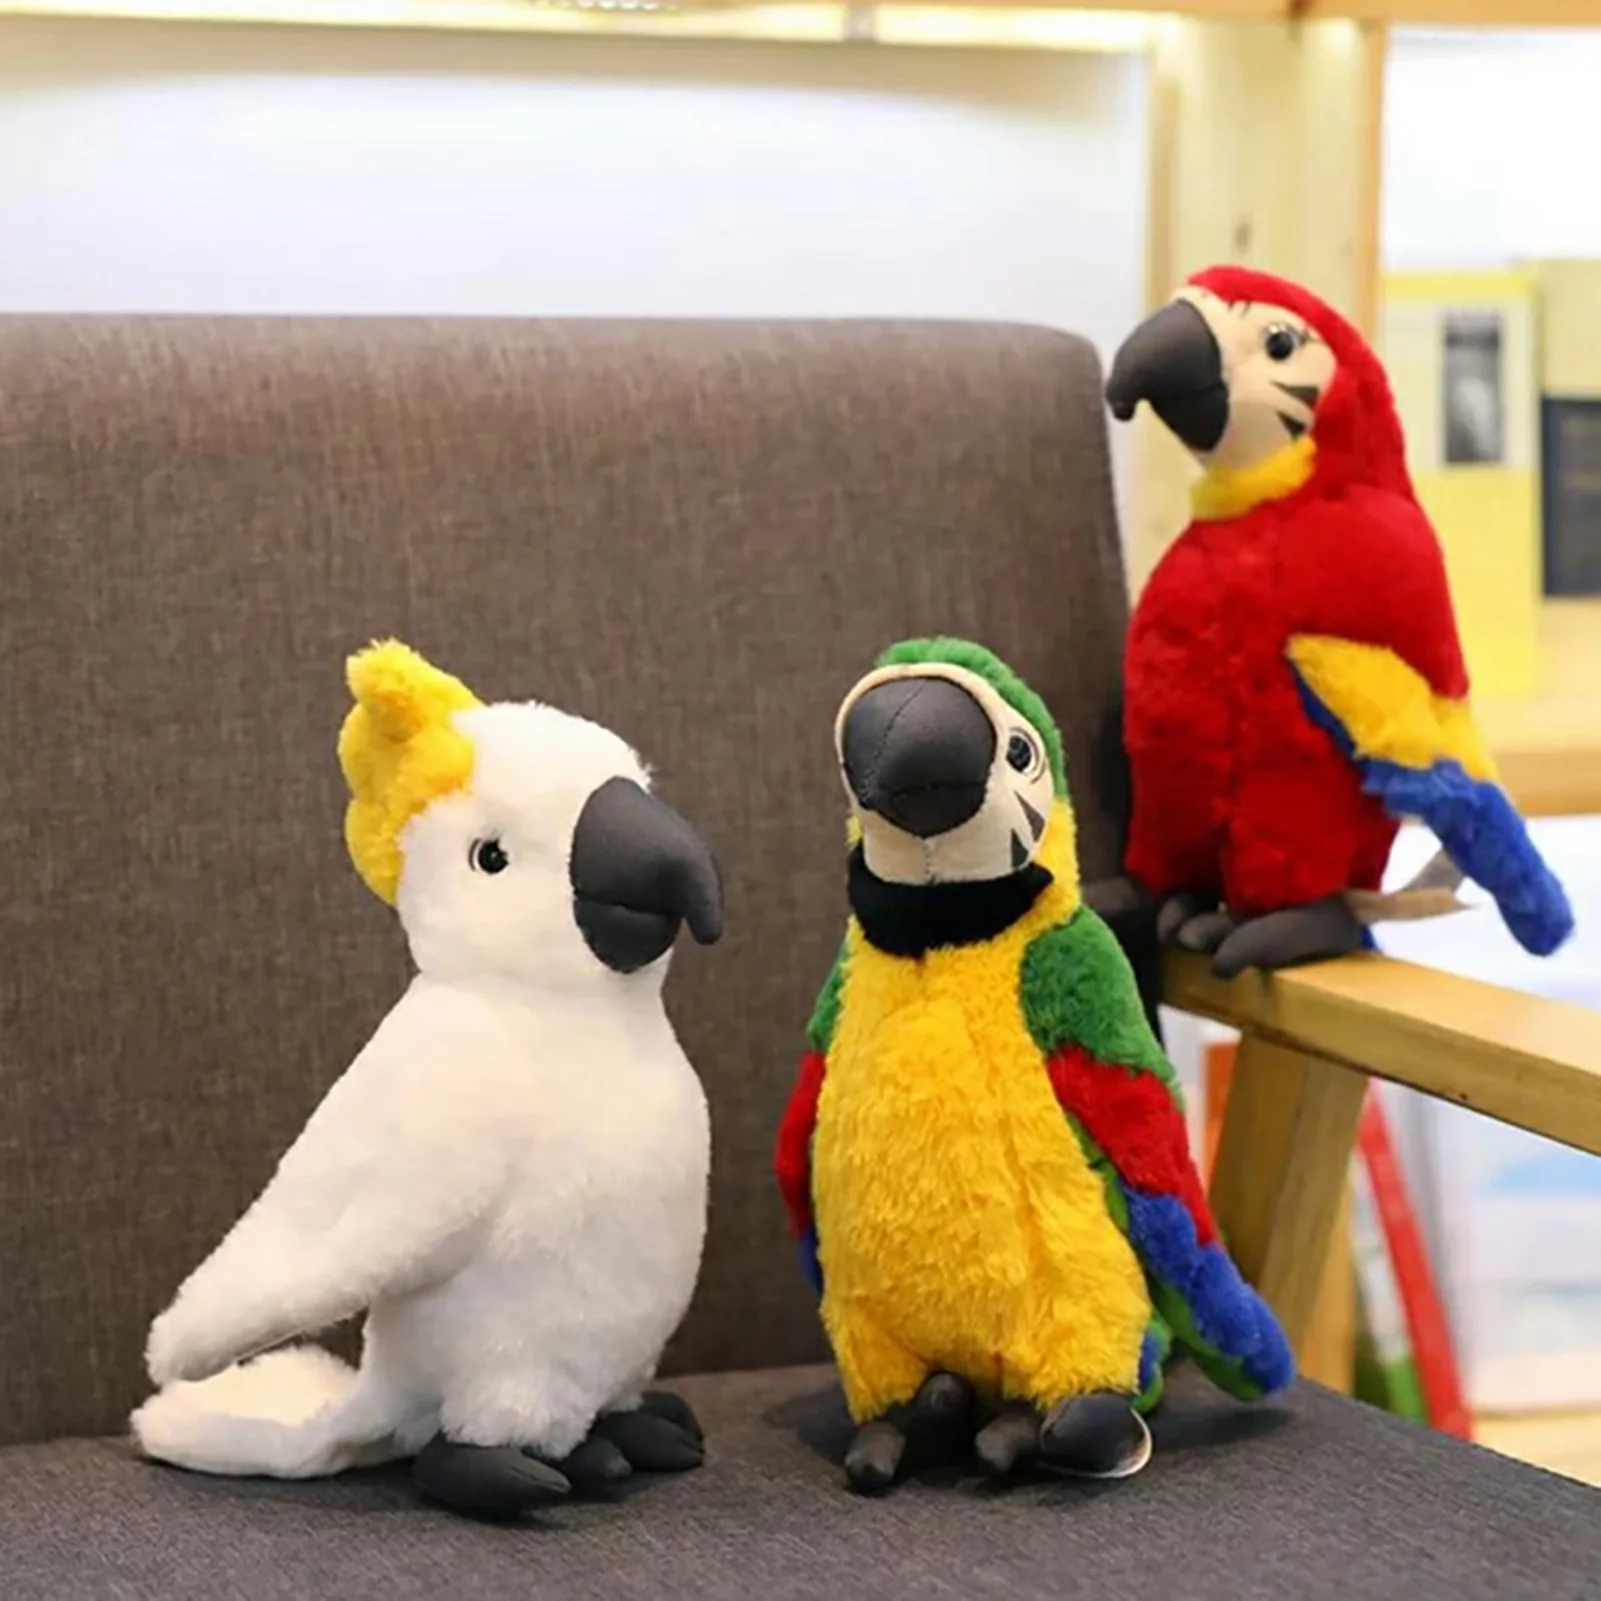 Shulemin Plush Toy Comfortable Parrot Pattern PP Cotton Kids Plush Toy Ornaments for Home Red